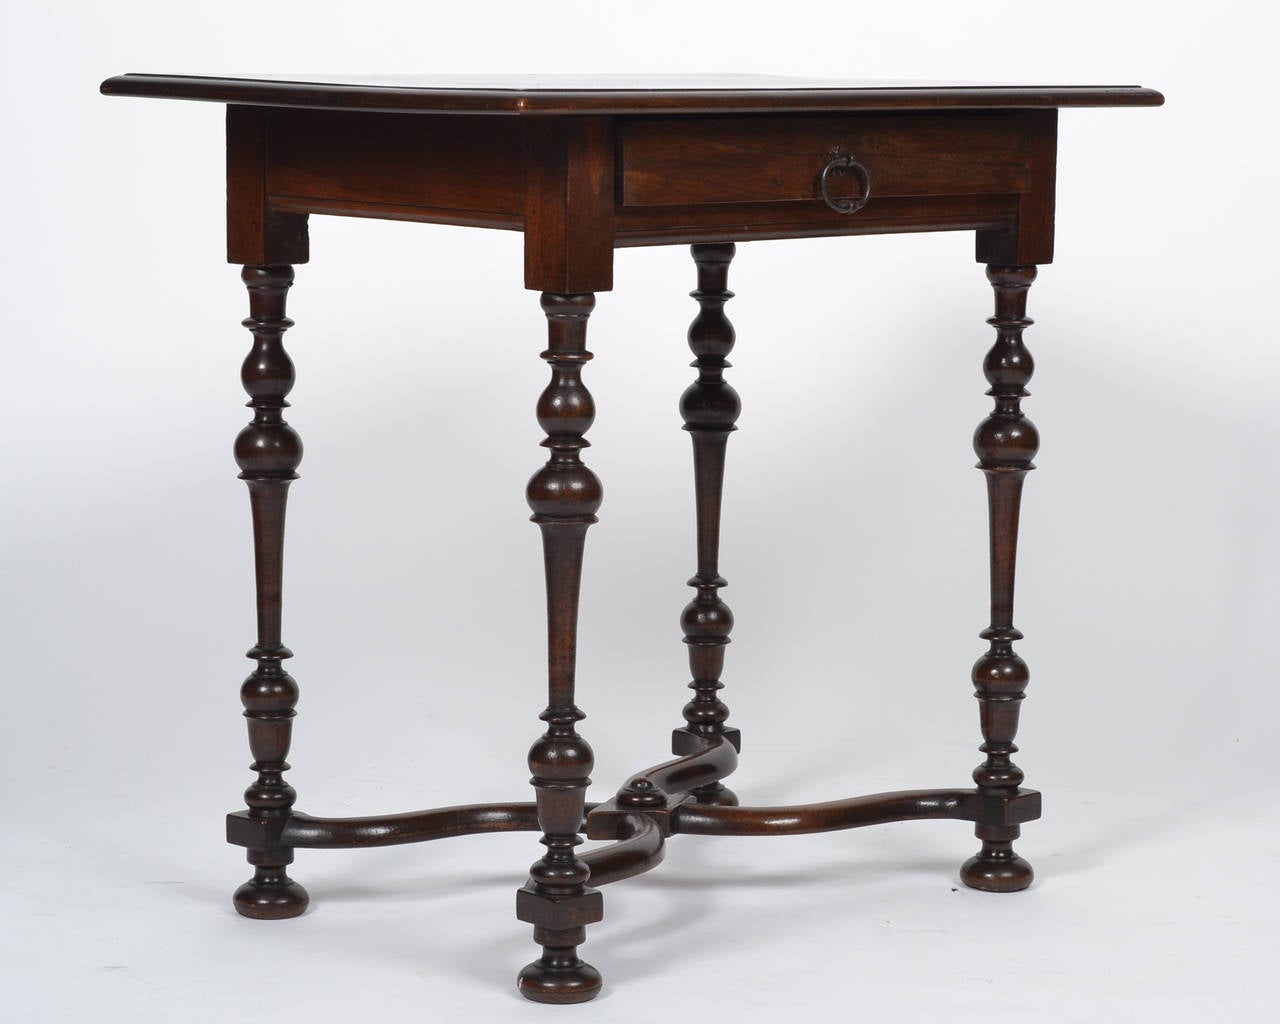 French 19th century writing table in Louis XIII style, with solid walnut construction, hand-turned legs, and a single drawer with original iron pull.